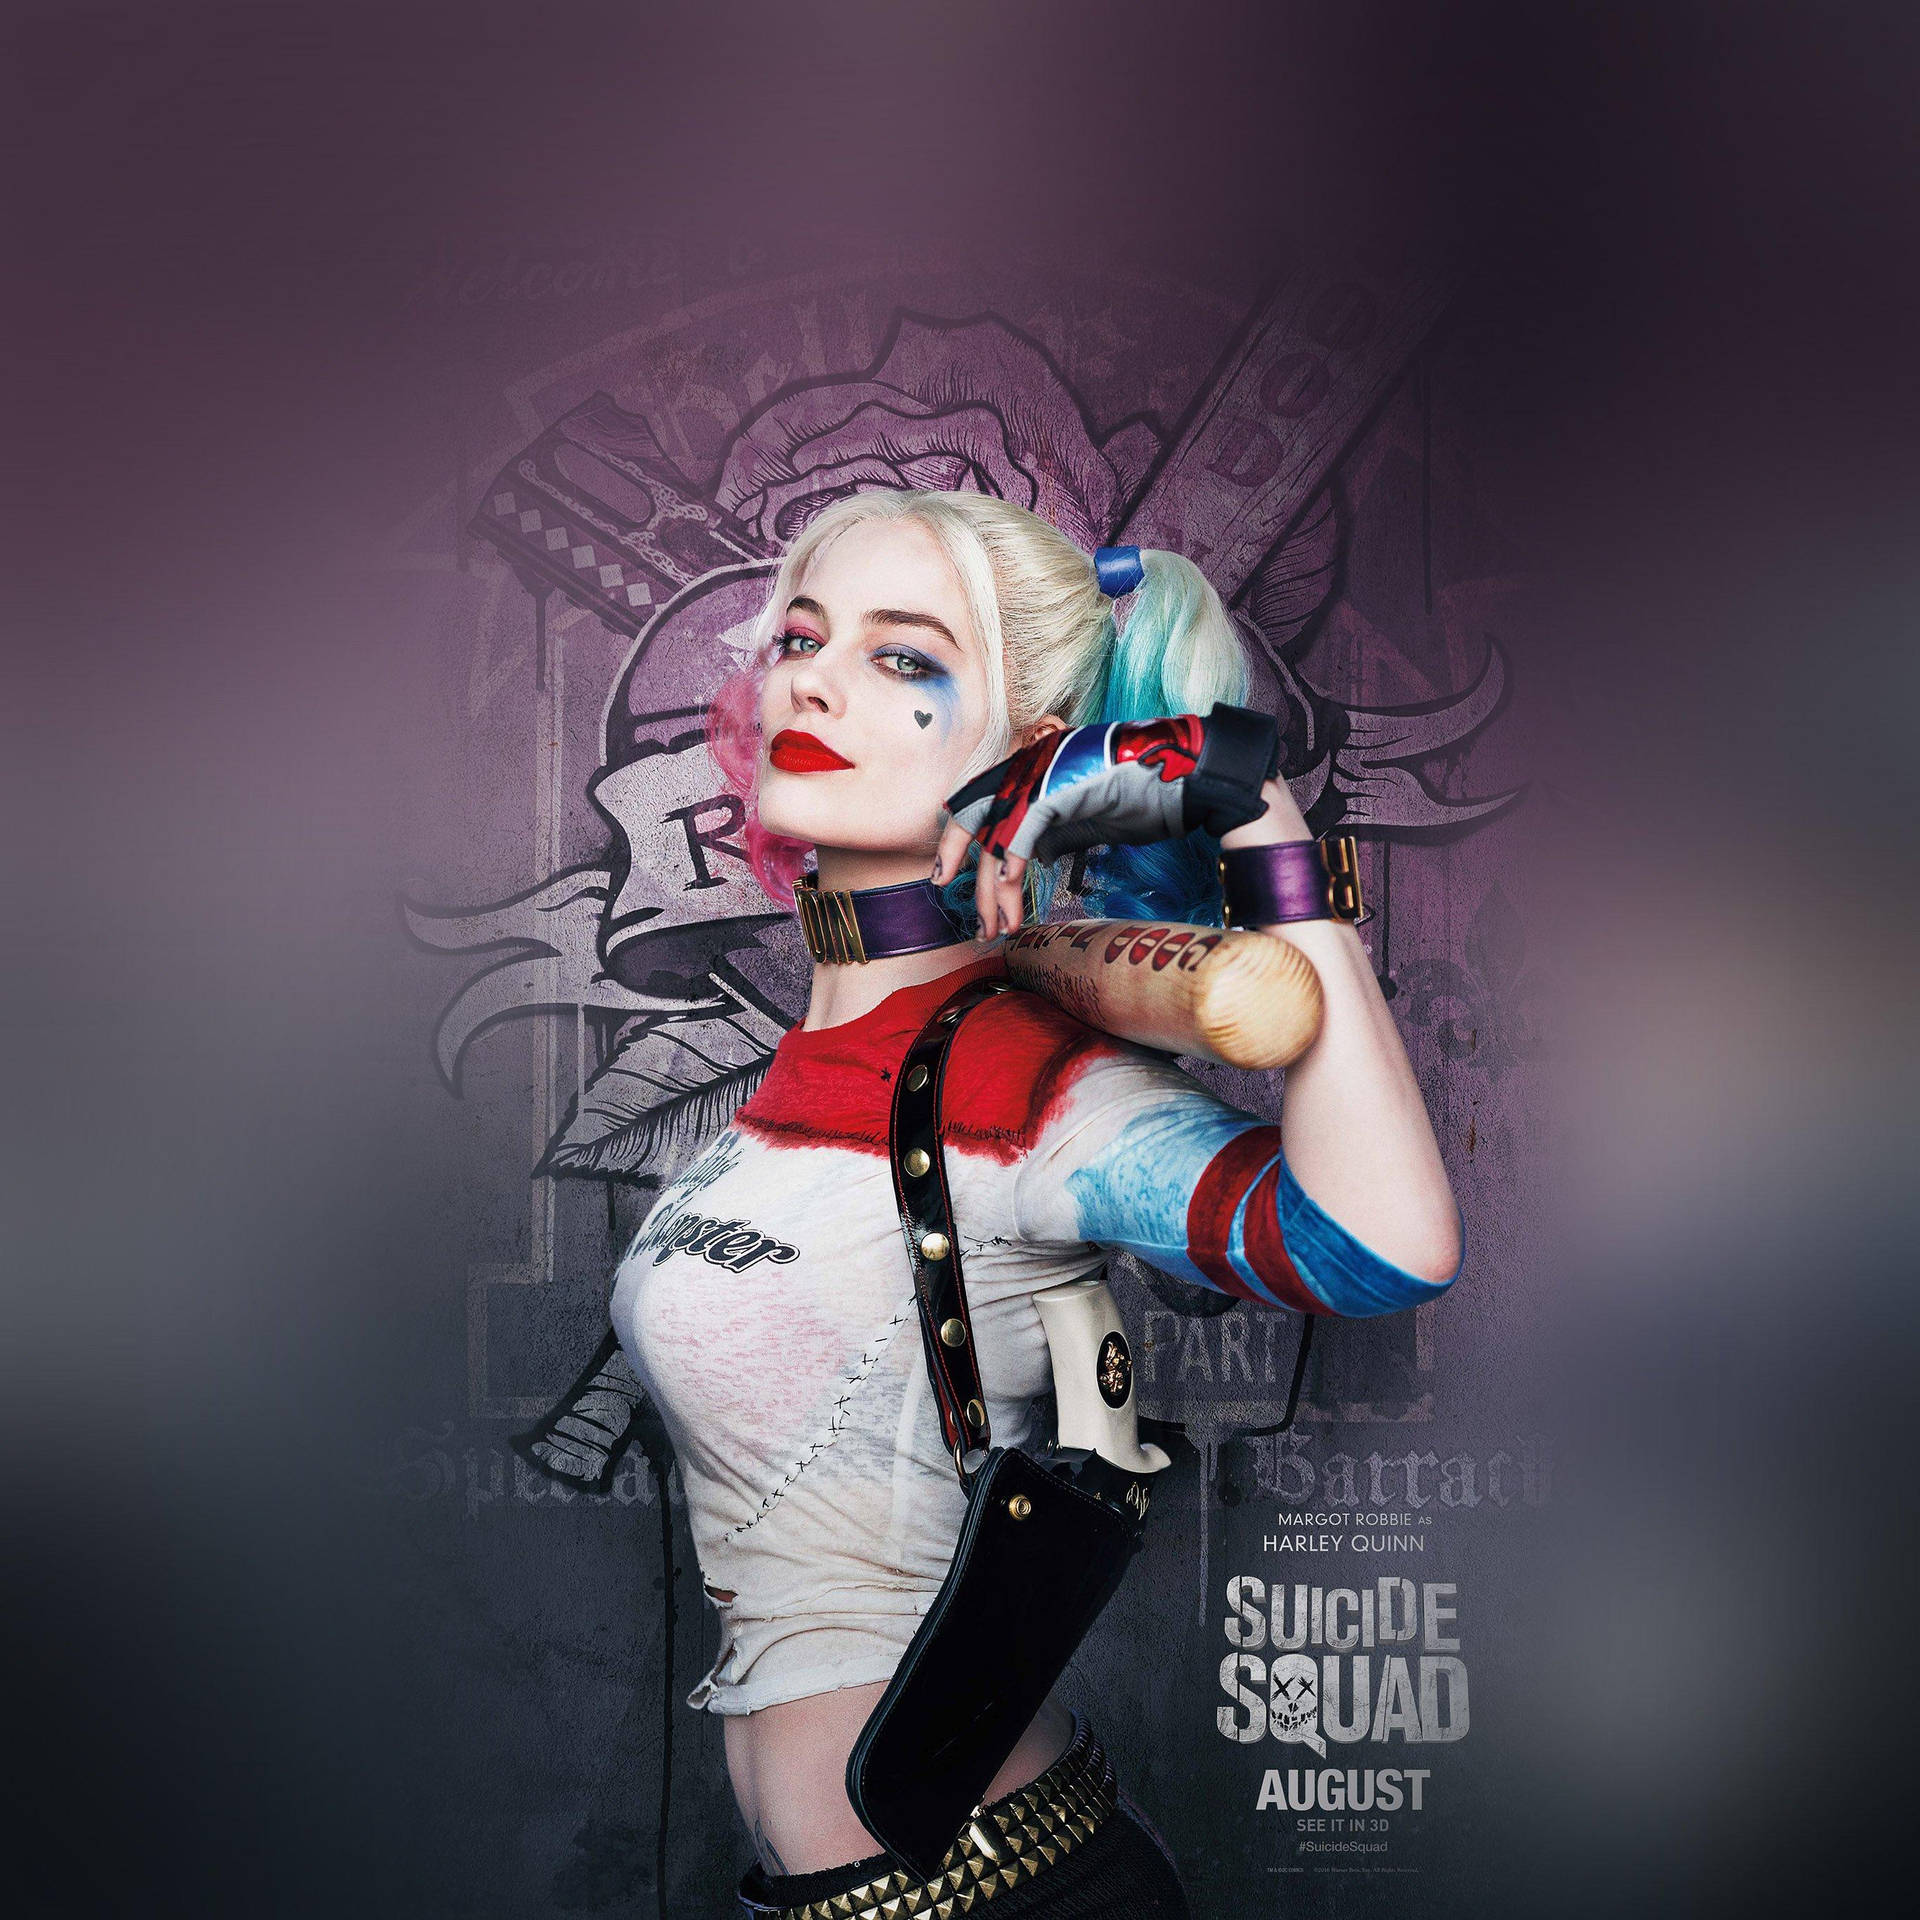 Harley Quinn 2732X2732 Wallpaper and Background Image